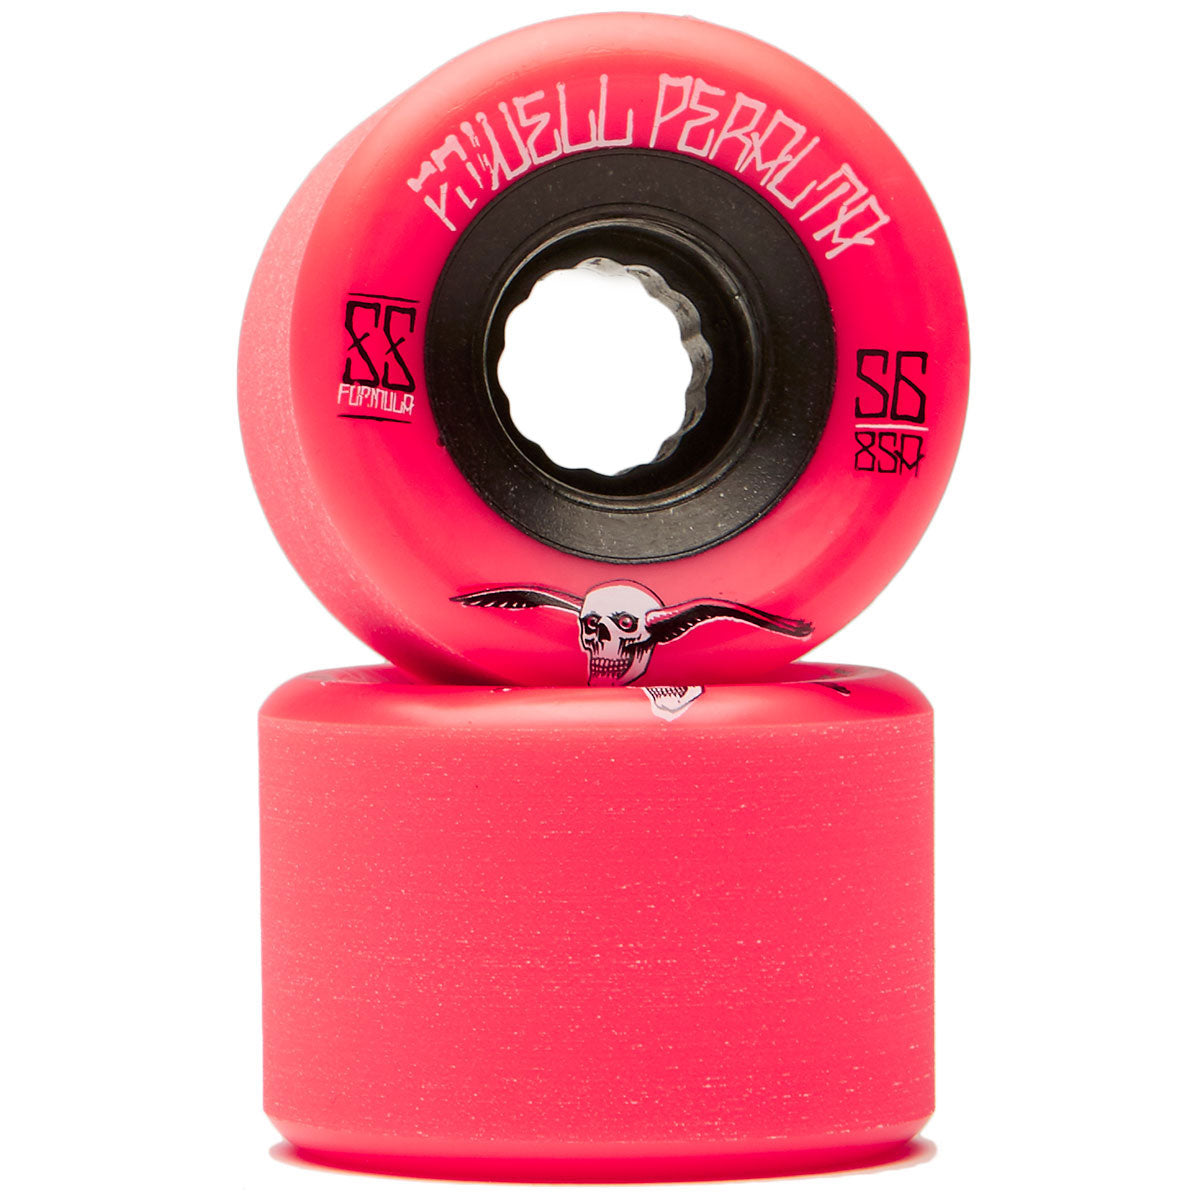 Powell-Peralta G-Slides 85A Longboard Wheels - Red - 56mm image 2